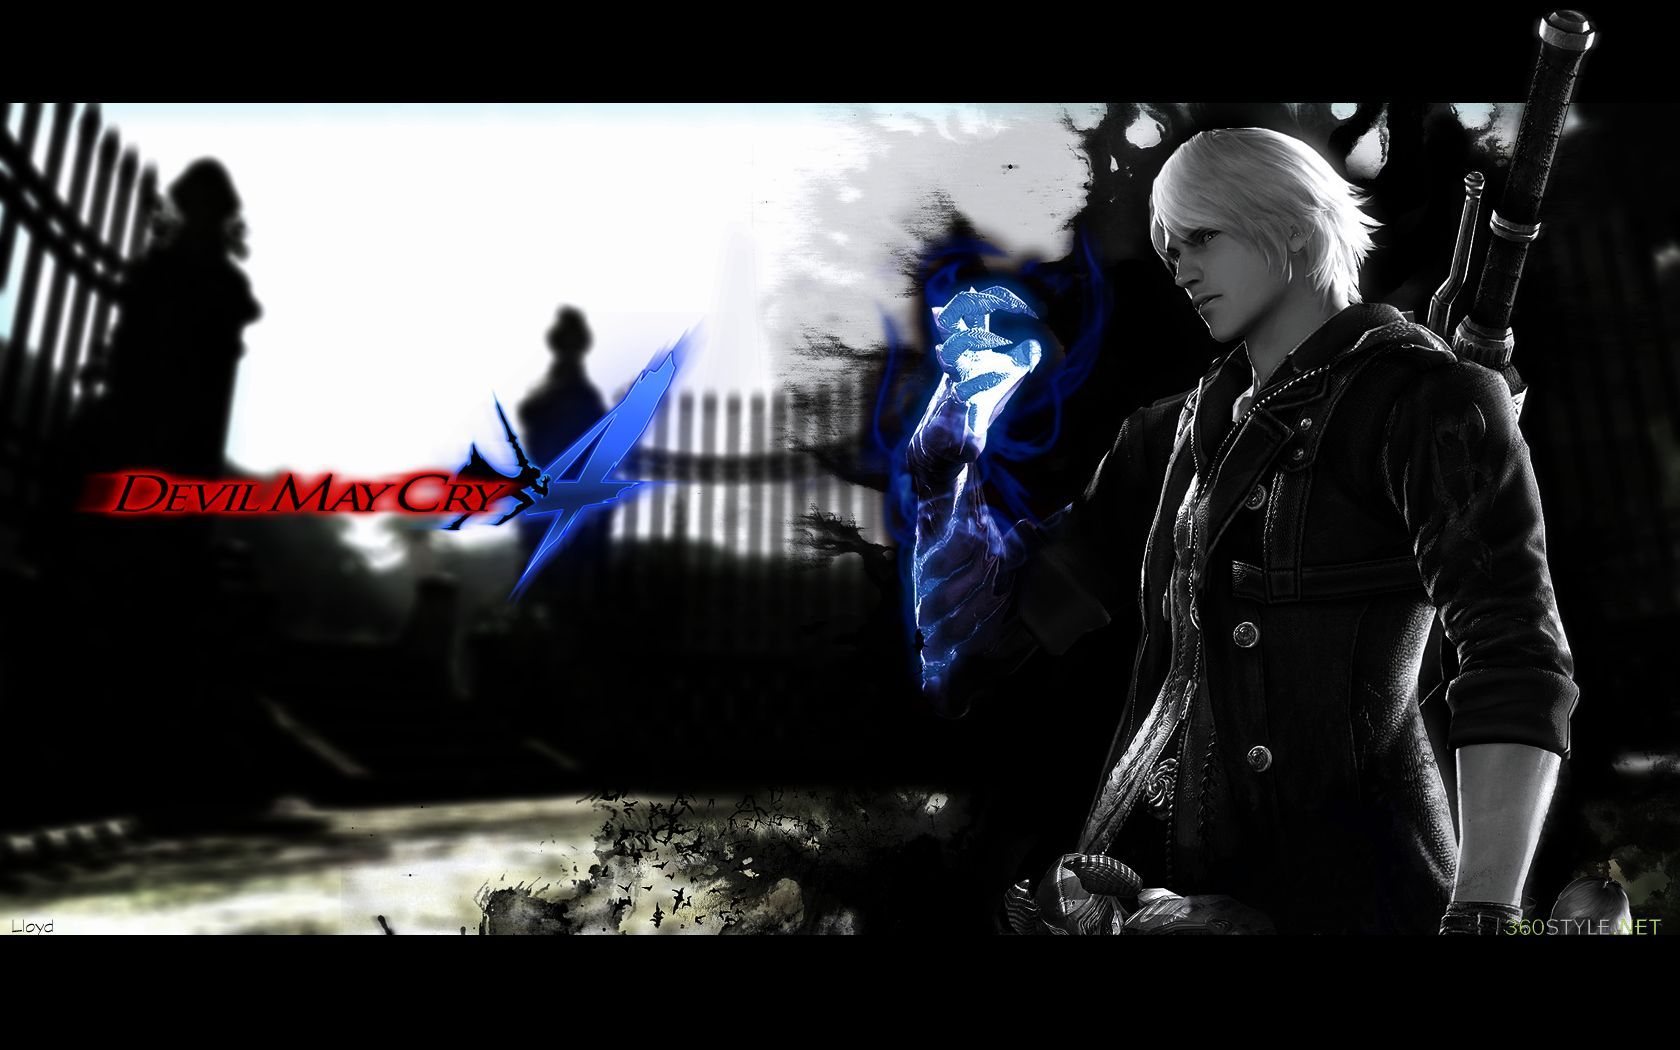 Devil May Cry 4 Wallpaper 4 by igotgame1075 on DeviantArt